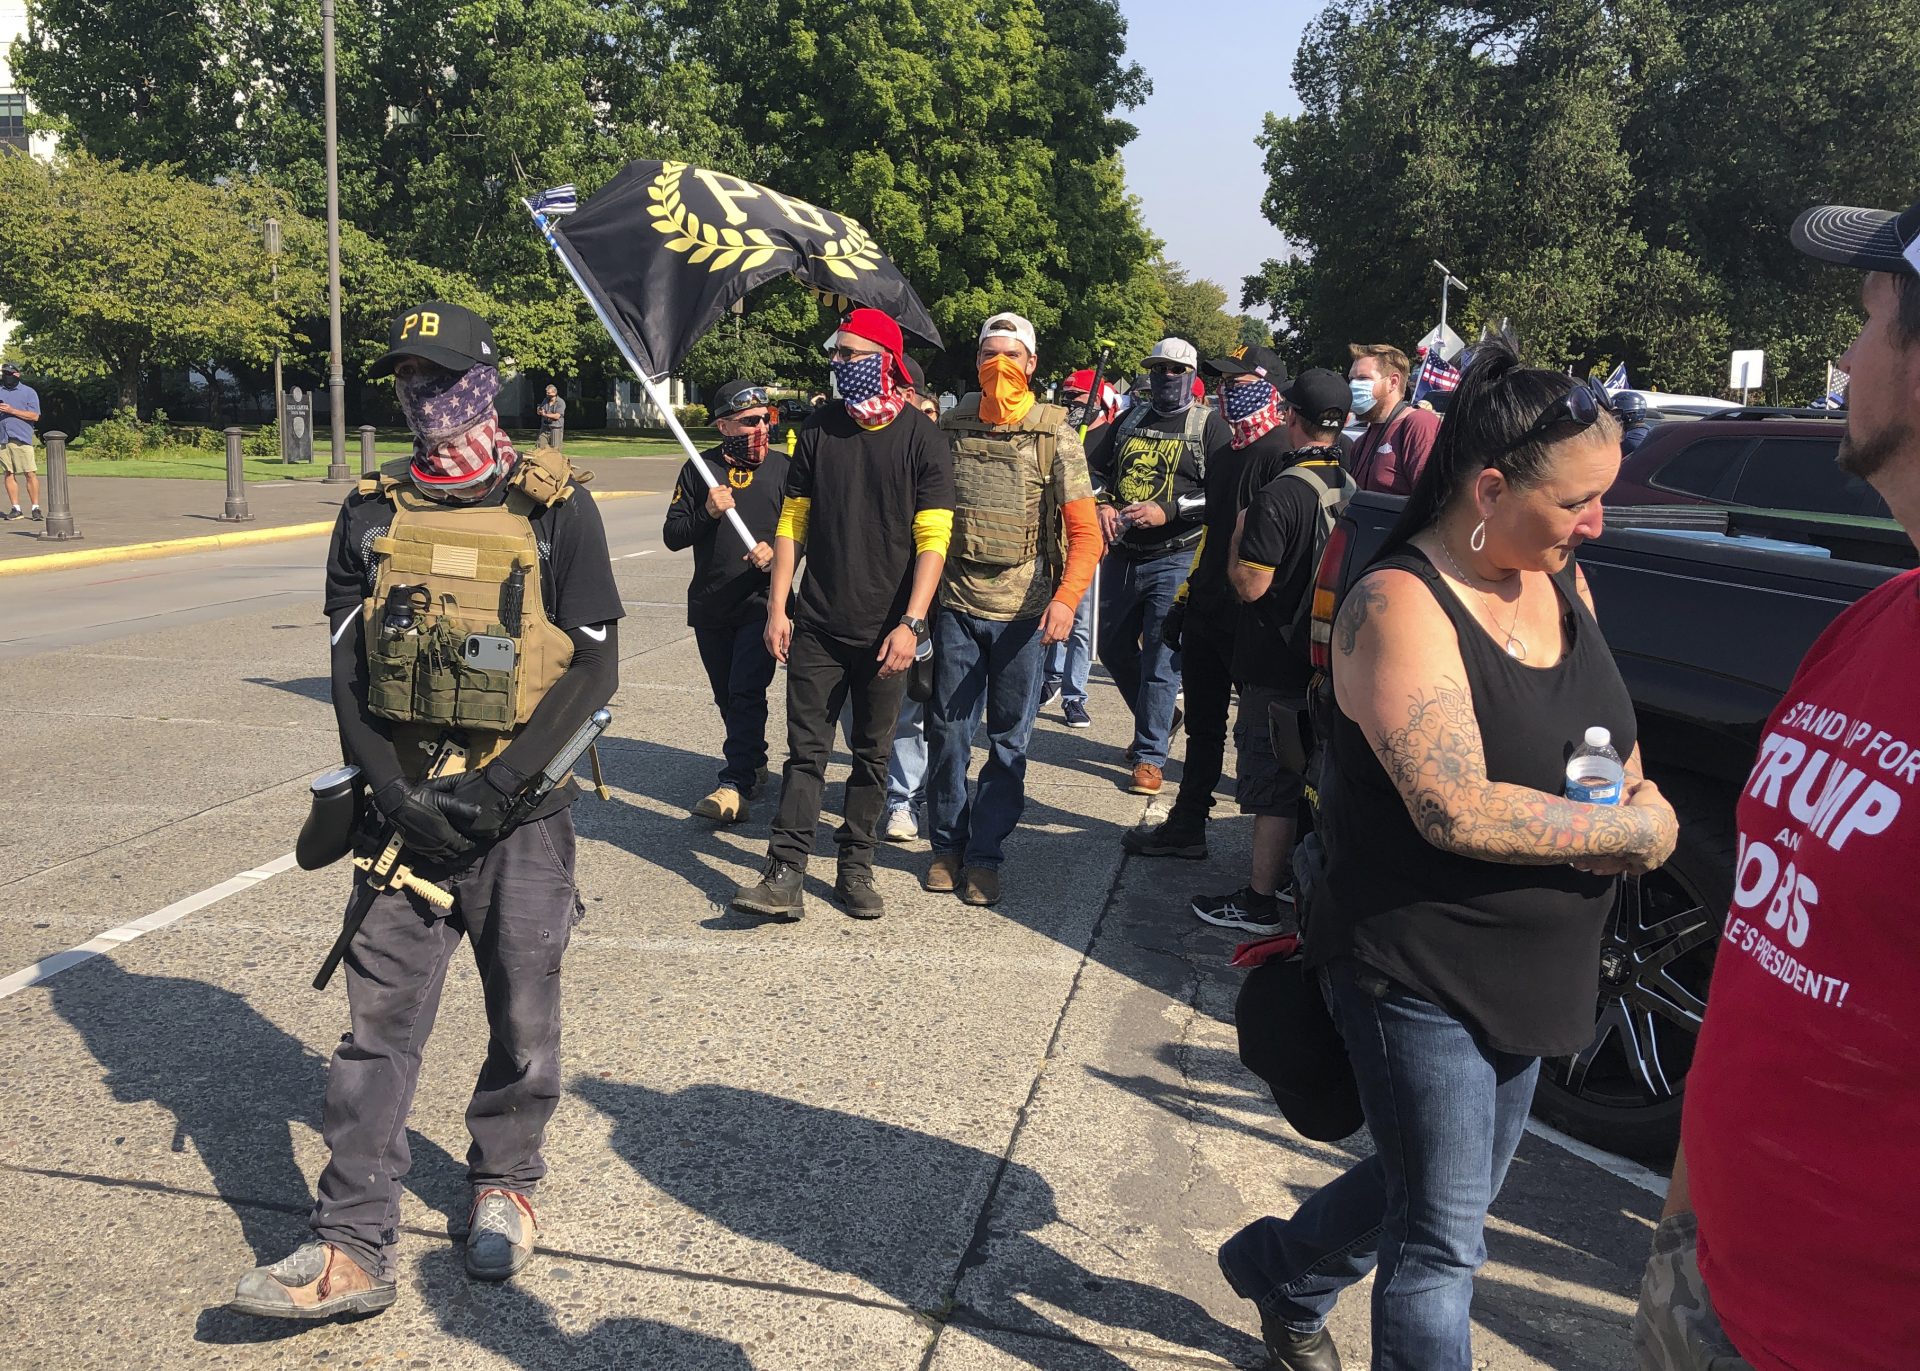 Members of the extremist right-wing group the Proud Boys arrive in Salem, Ore., on Monday Sept. 7, 2020 for a pro-Donald Trump rally at the Capitol.